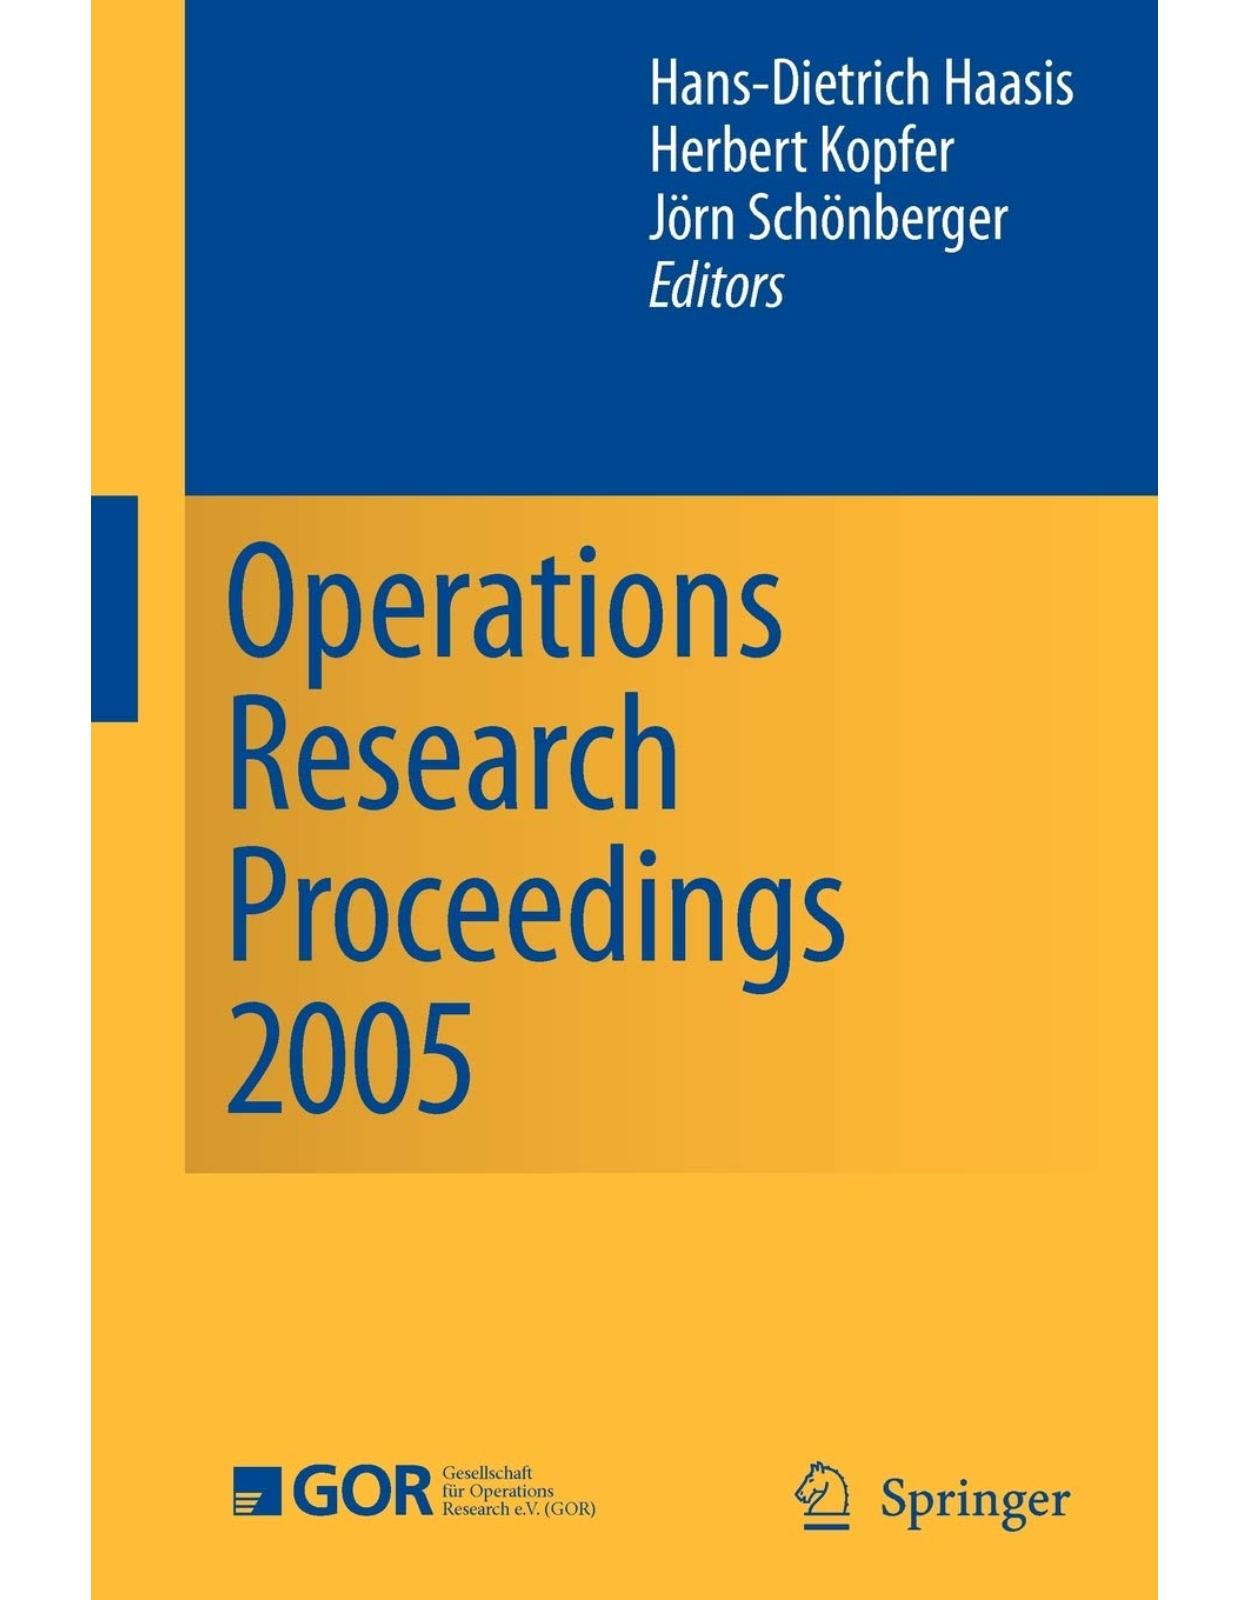 Operations Research Proceedings 2005